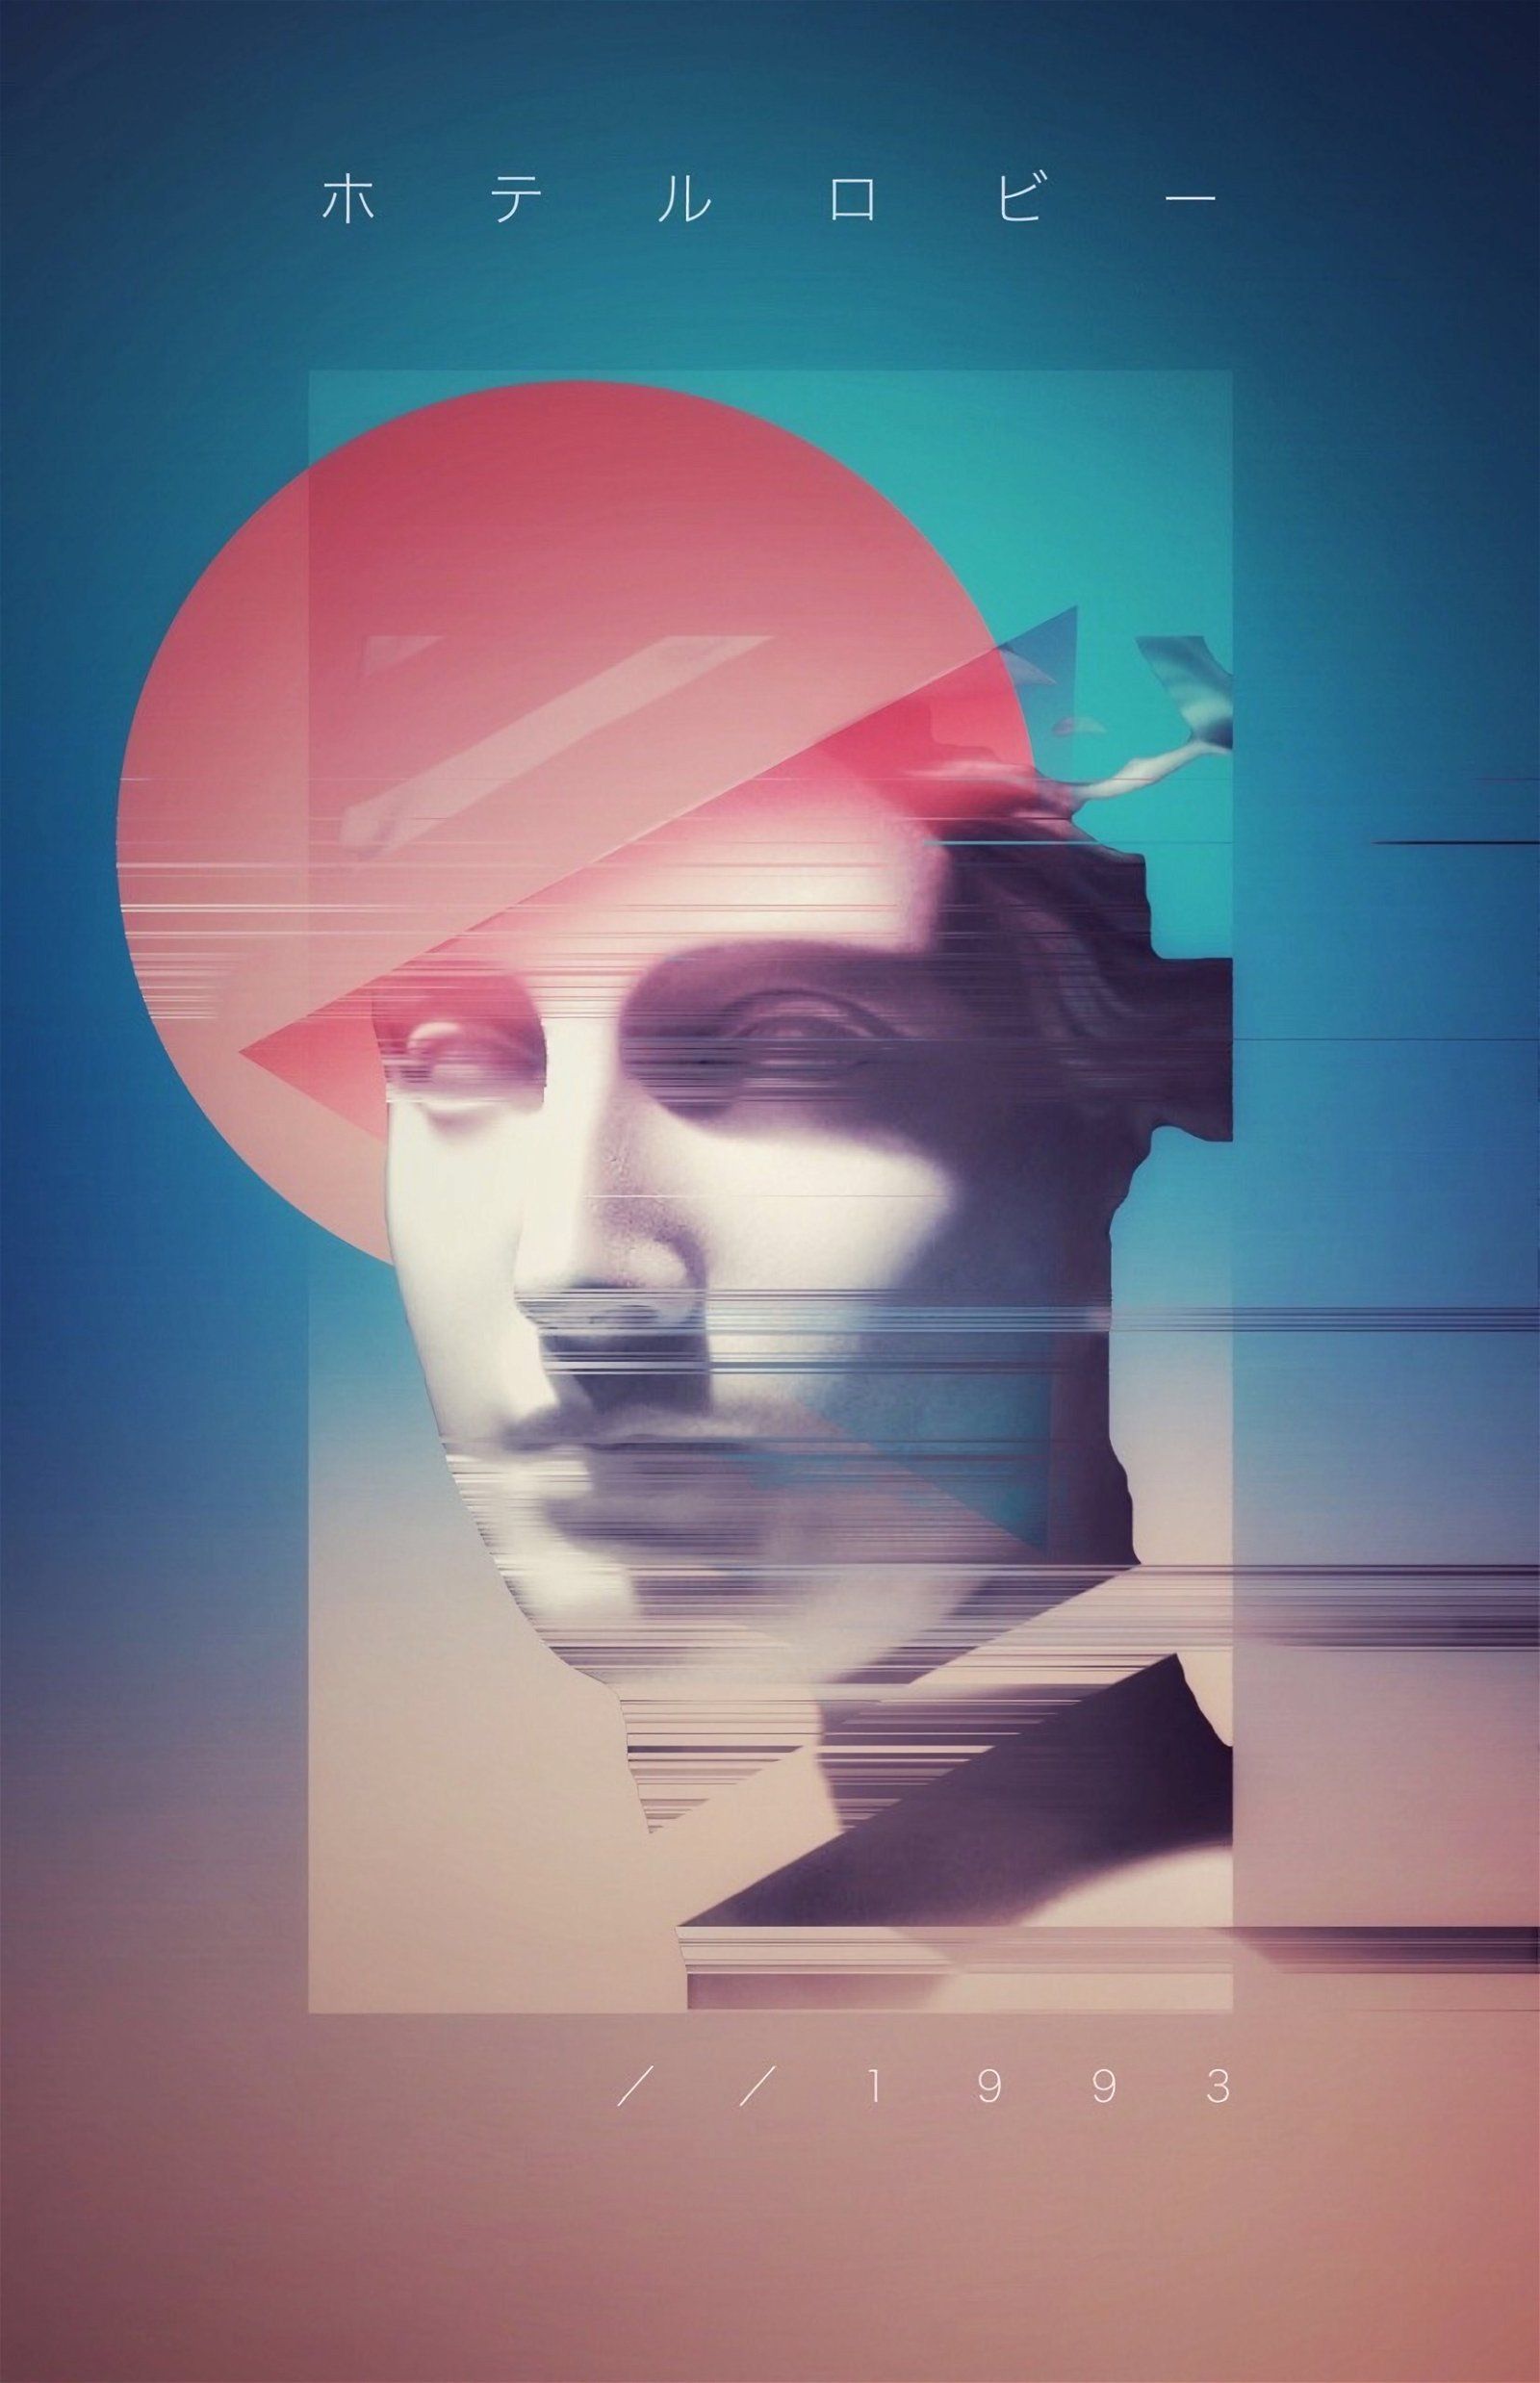 A poster with an image of the face and hat - Vaporwave